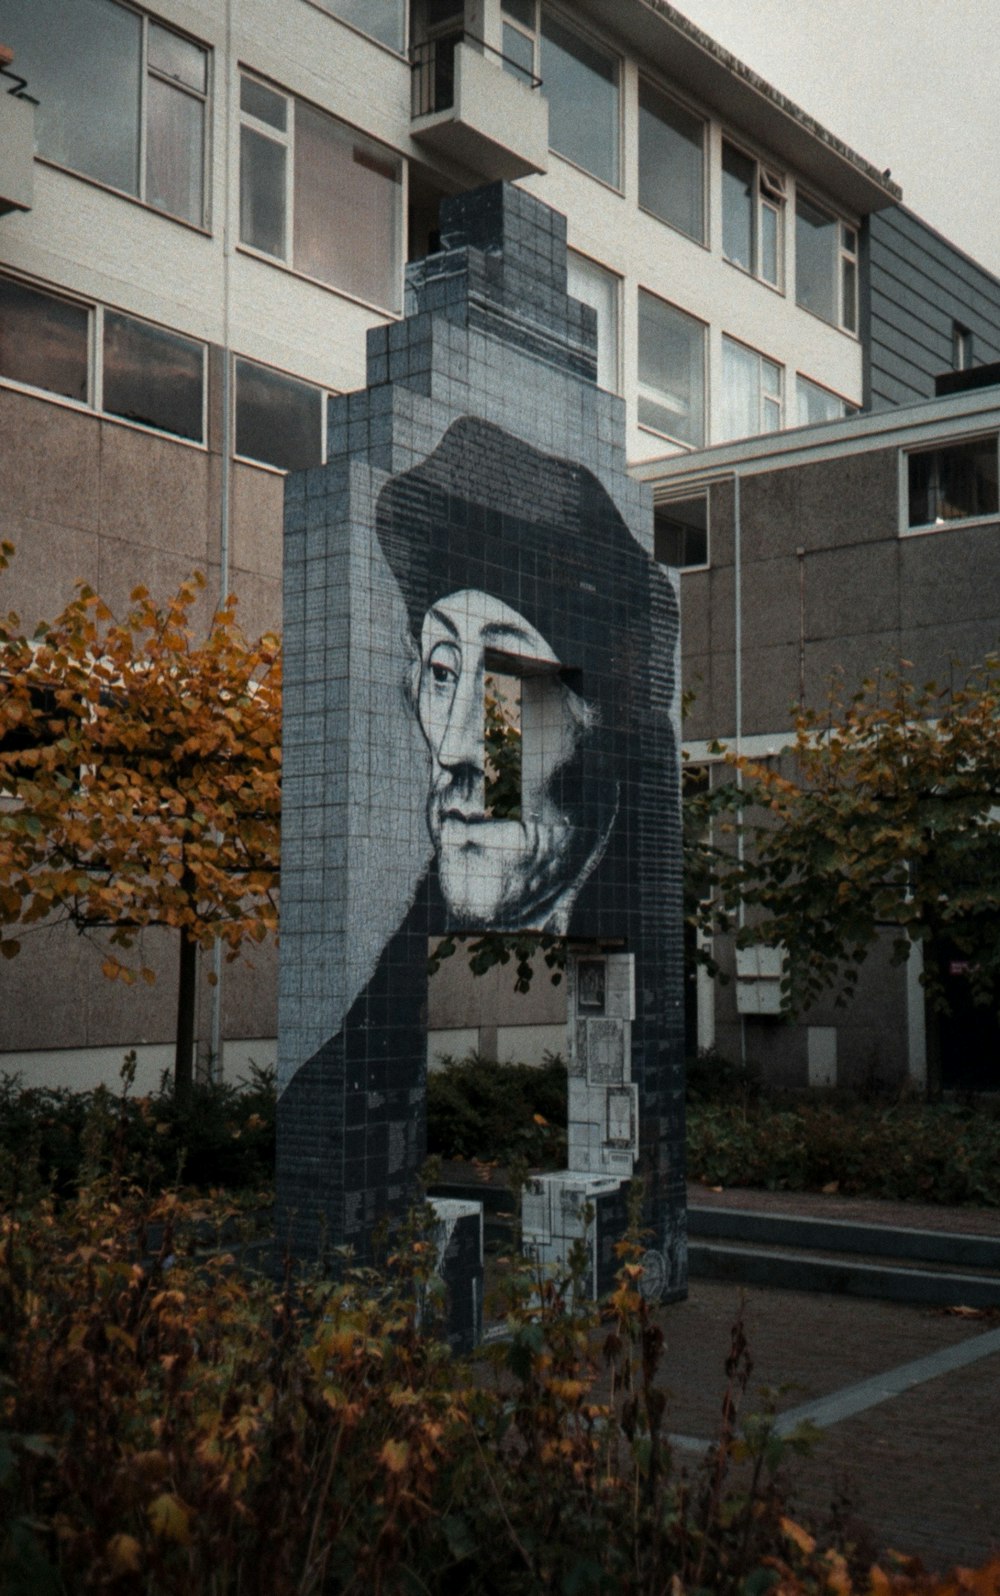 a picture of a man with a hat is on the side of a building